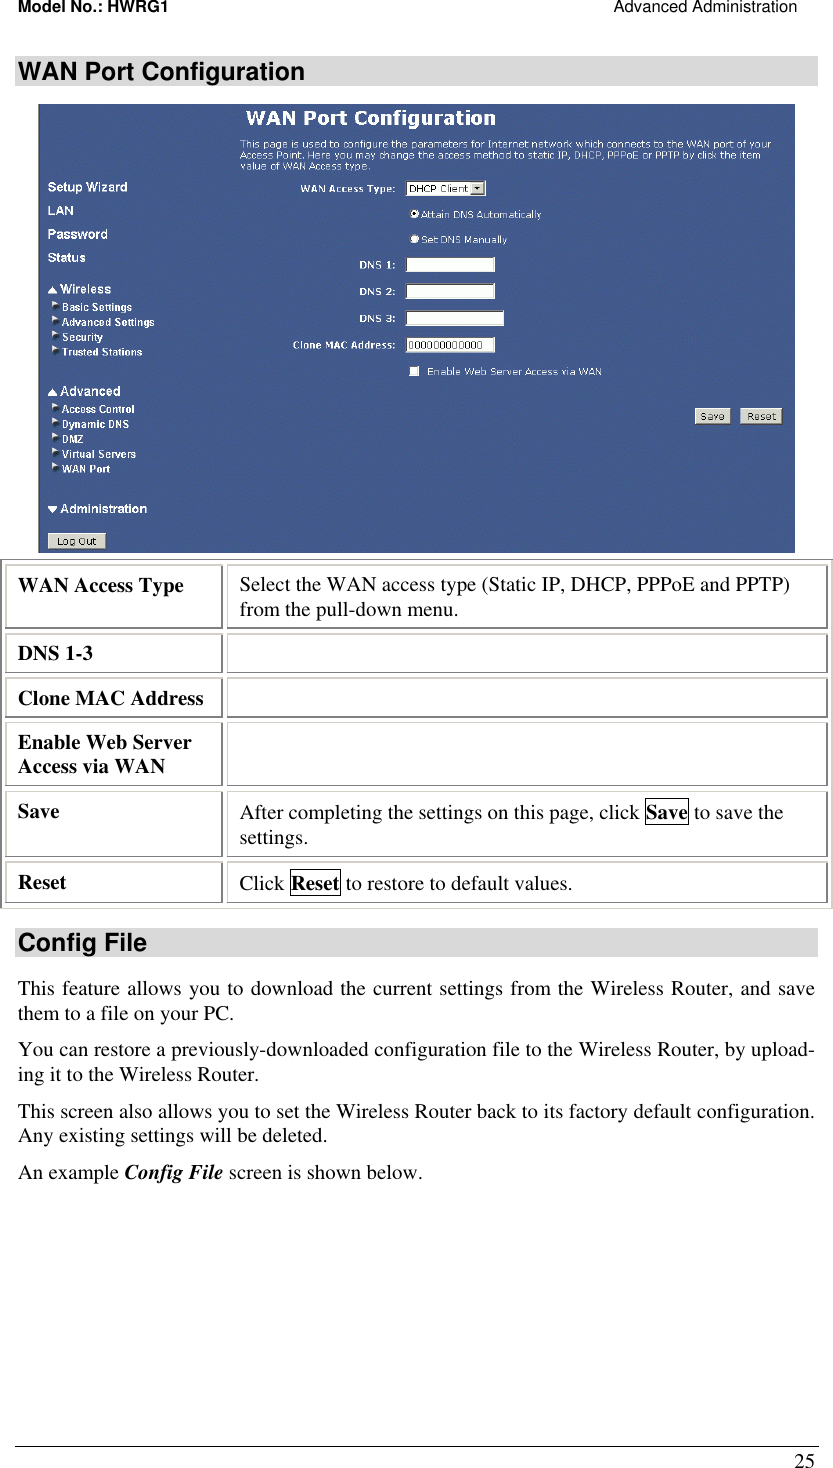 Model No.: HWRG1                                                                                                Advanced Administration 25 WAN Port Configuration  WAN Access Type  Select the WAN access type (Static IP, DHCP, PPPoE and PPTP) from the pull-down menu. DNS 1-3   Clone MAC Address   Enable Web Server Access via WAN   Save   After completing the settings on this page, click Save to save the settings. Reset  Click Reset to restore to default values. Config File This feature allows you to download the current settings from the Wireless Router, and save them to a file on your PC. You can restore a previously-downloaded configuration file to the Wireless Router, by upload-ing it to the Wireless Router. This screen also allows you to set the Wireless Router back to its factory default configuration. Any existing settings will be deleted. An example Config File screen is shown below. 